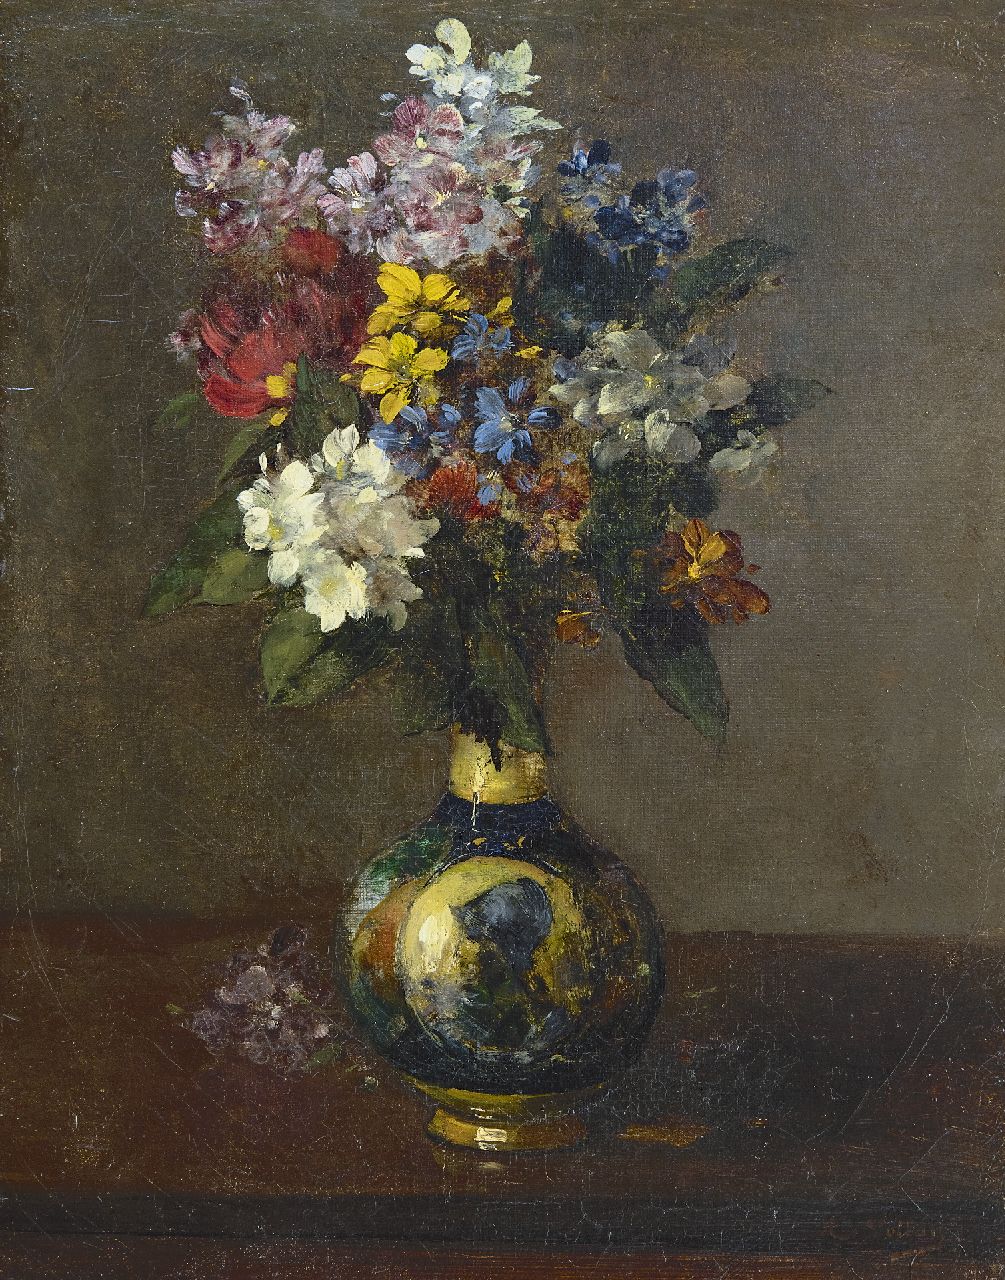 Vollon A.  | Antoine Vollon | Paintings offered for sale | Flowers in a vase, oil on canvas 41.4 x 32.0 cm, signed l.r.